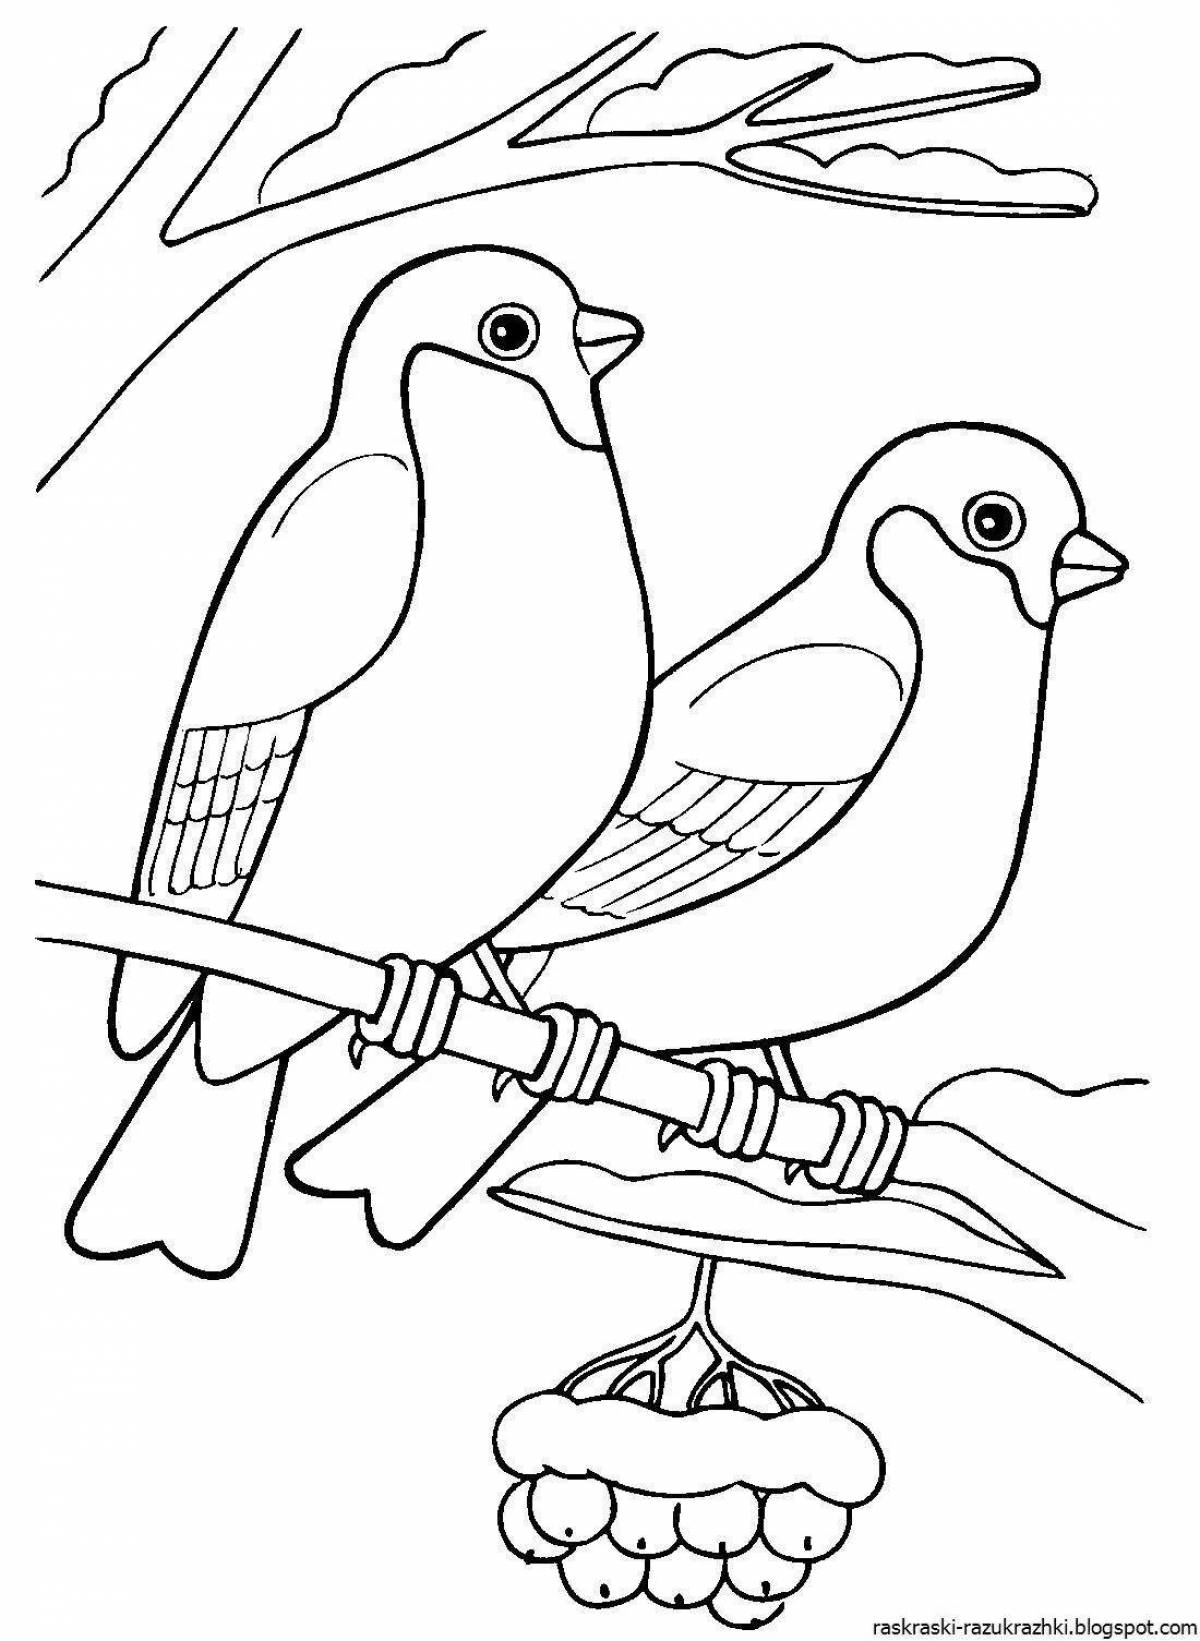 Exotic wintering birds coloring book for 2-3 year olds